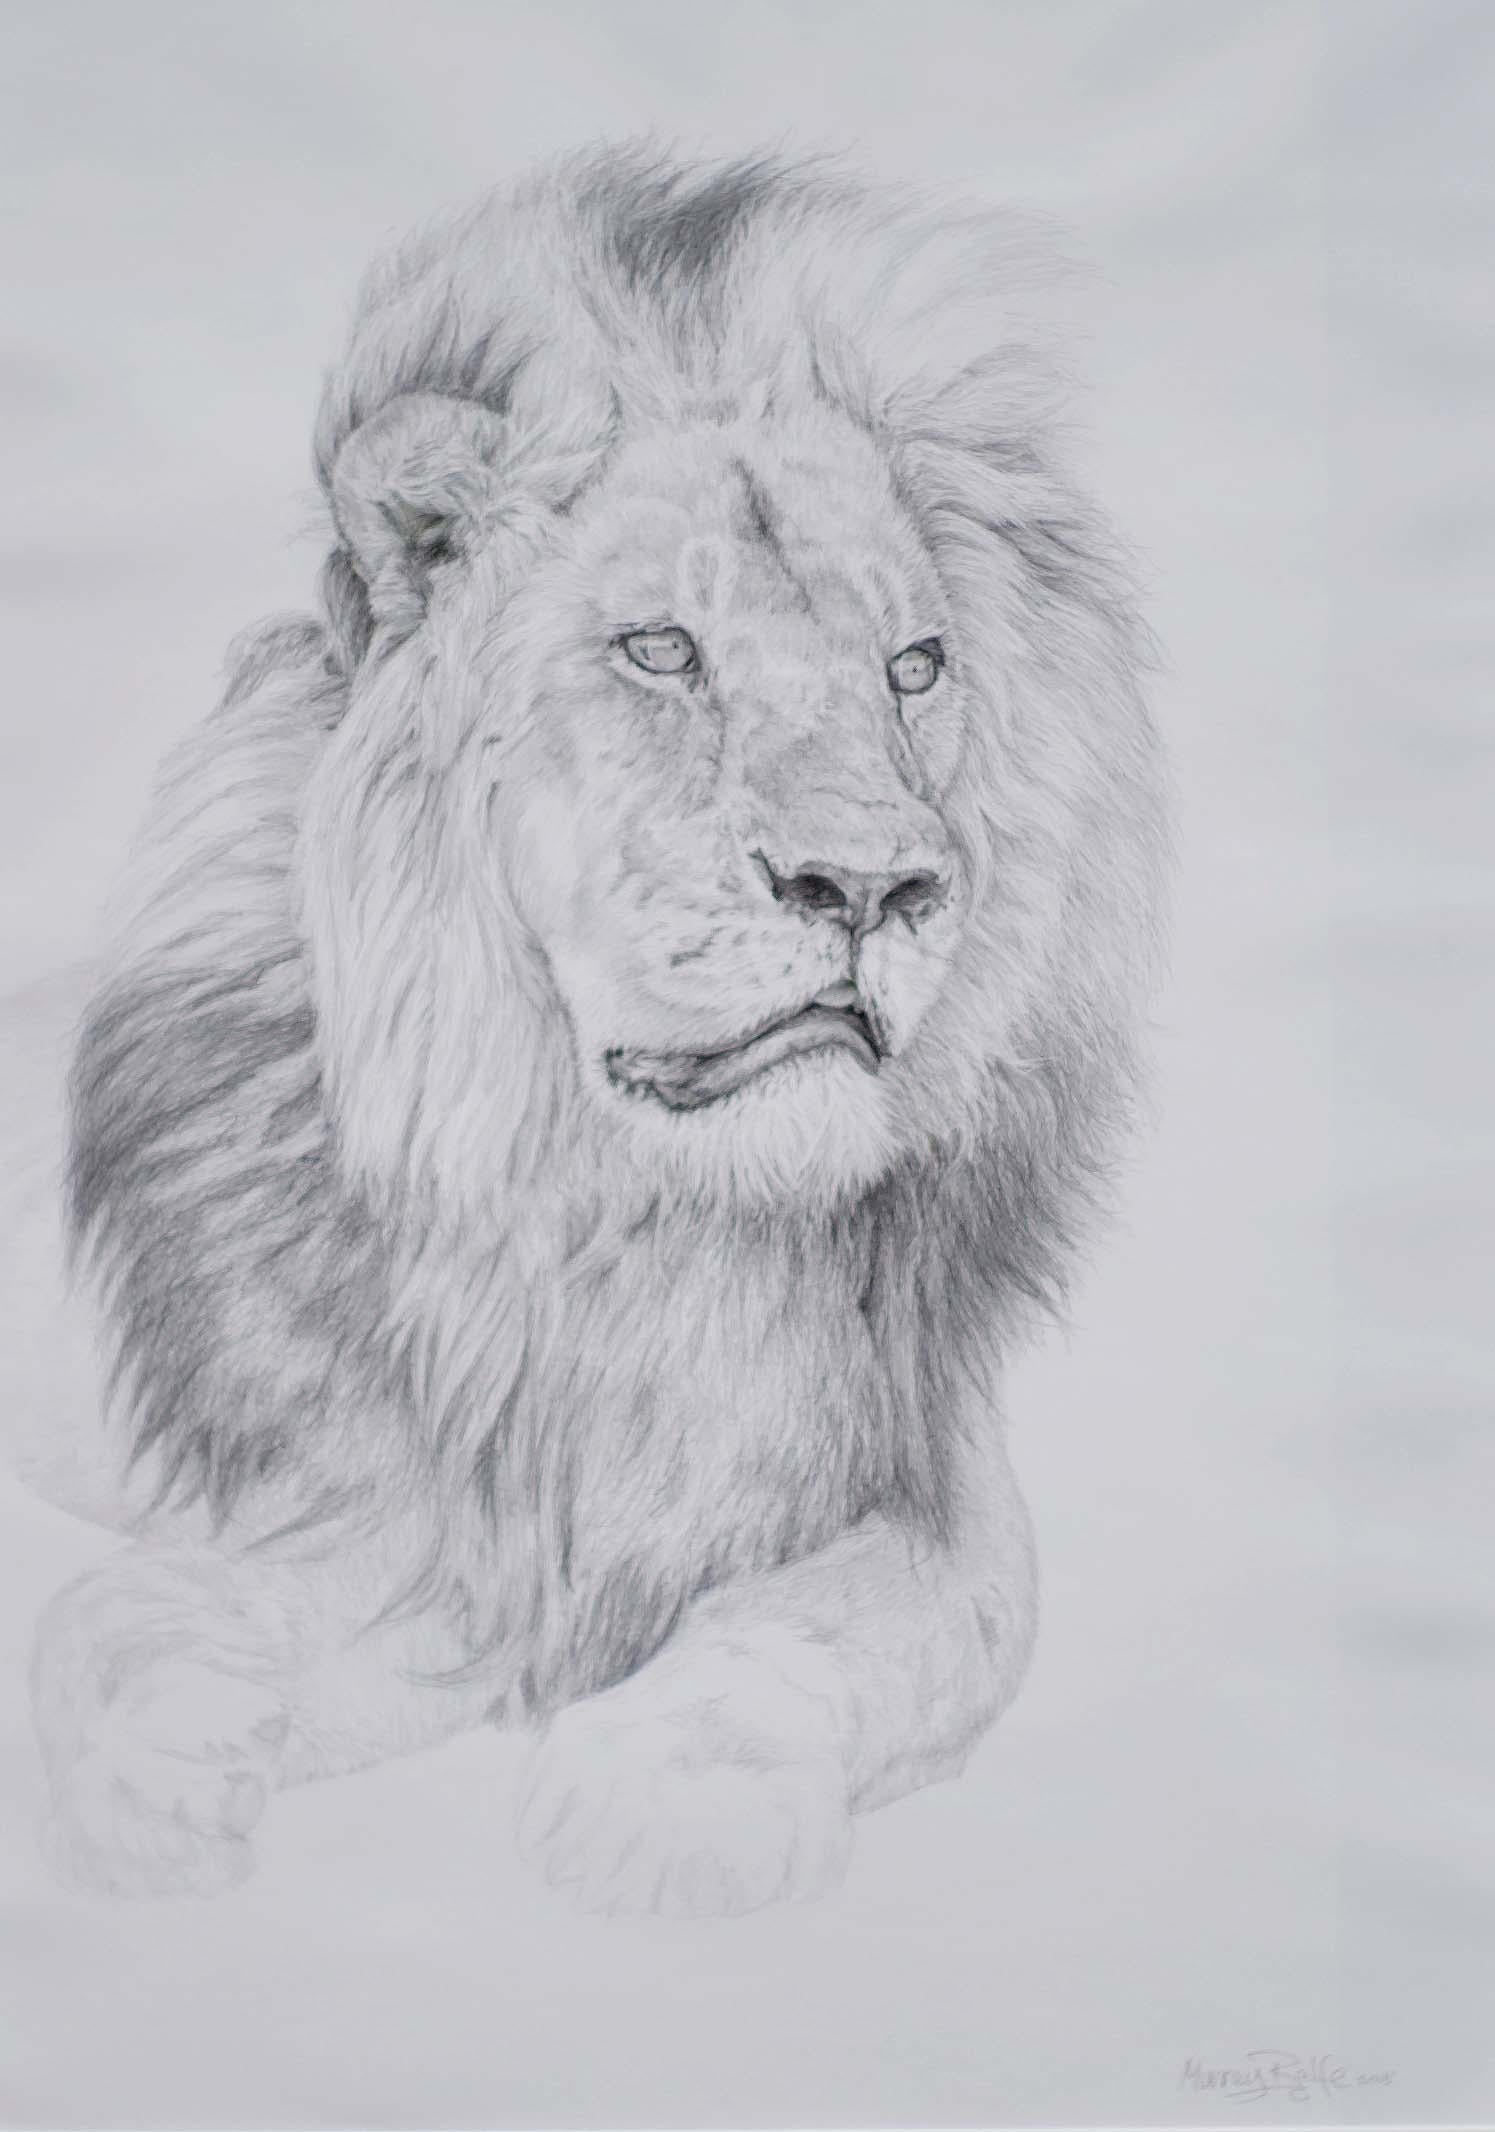 Murray Ralfe Animal Art - Study of a Lion - Wildlife, Drawing, Contemporary, Lion, Realist